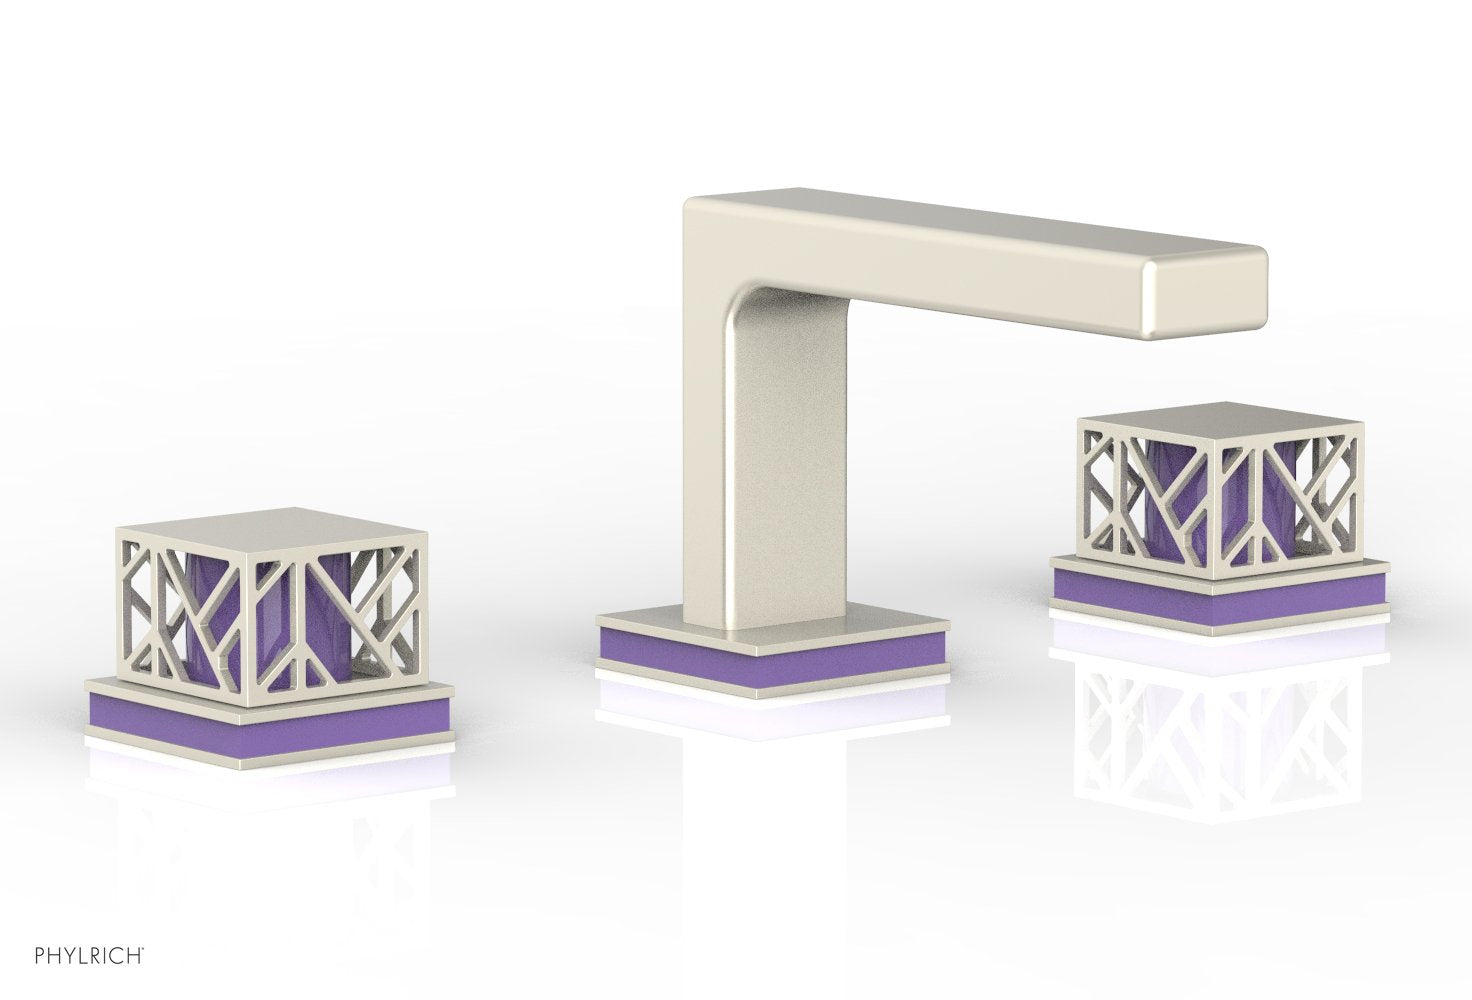 Phylrich JOLIE Widespread Faucet - Square Handles with "Purple" Accents